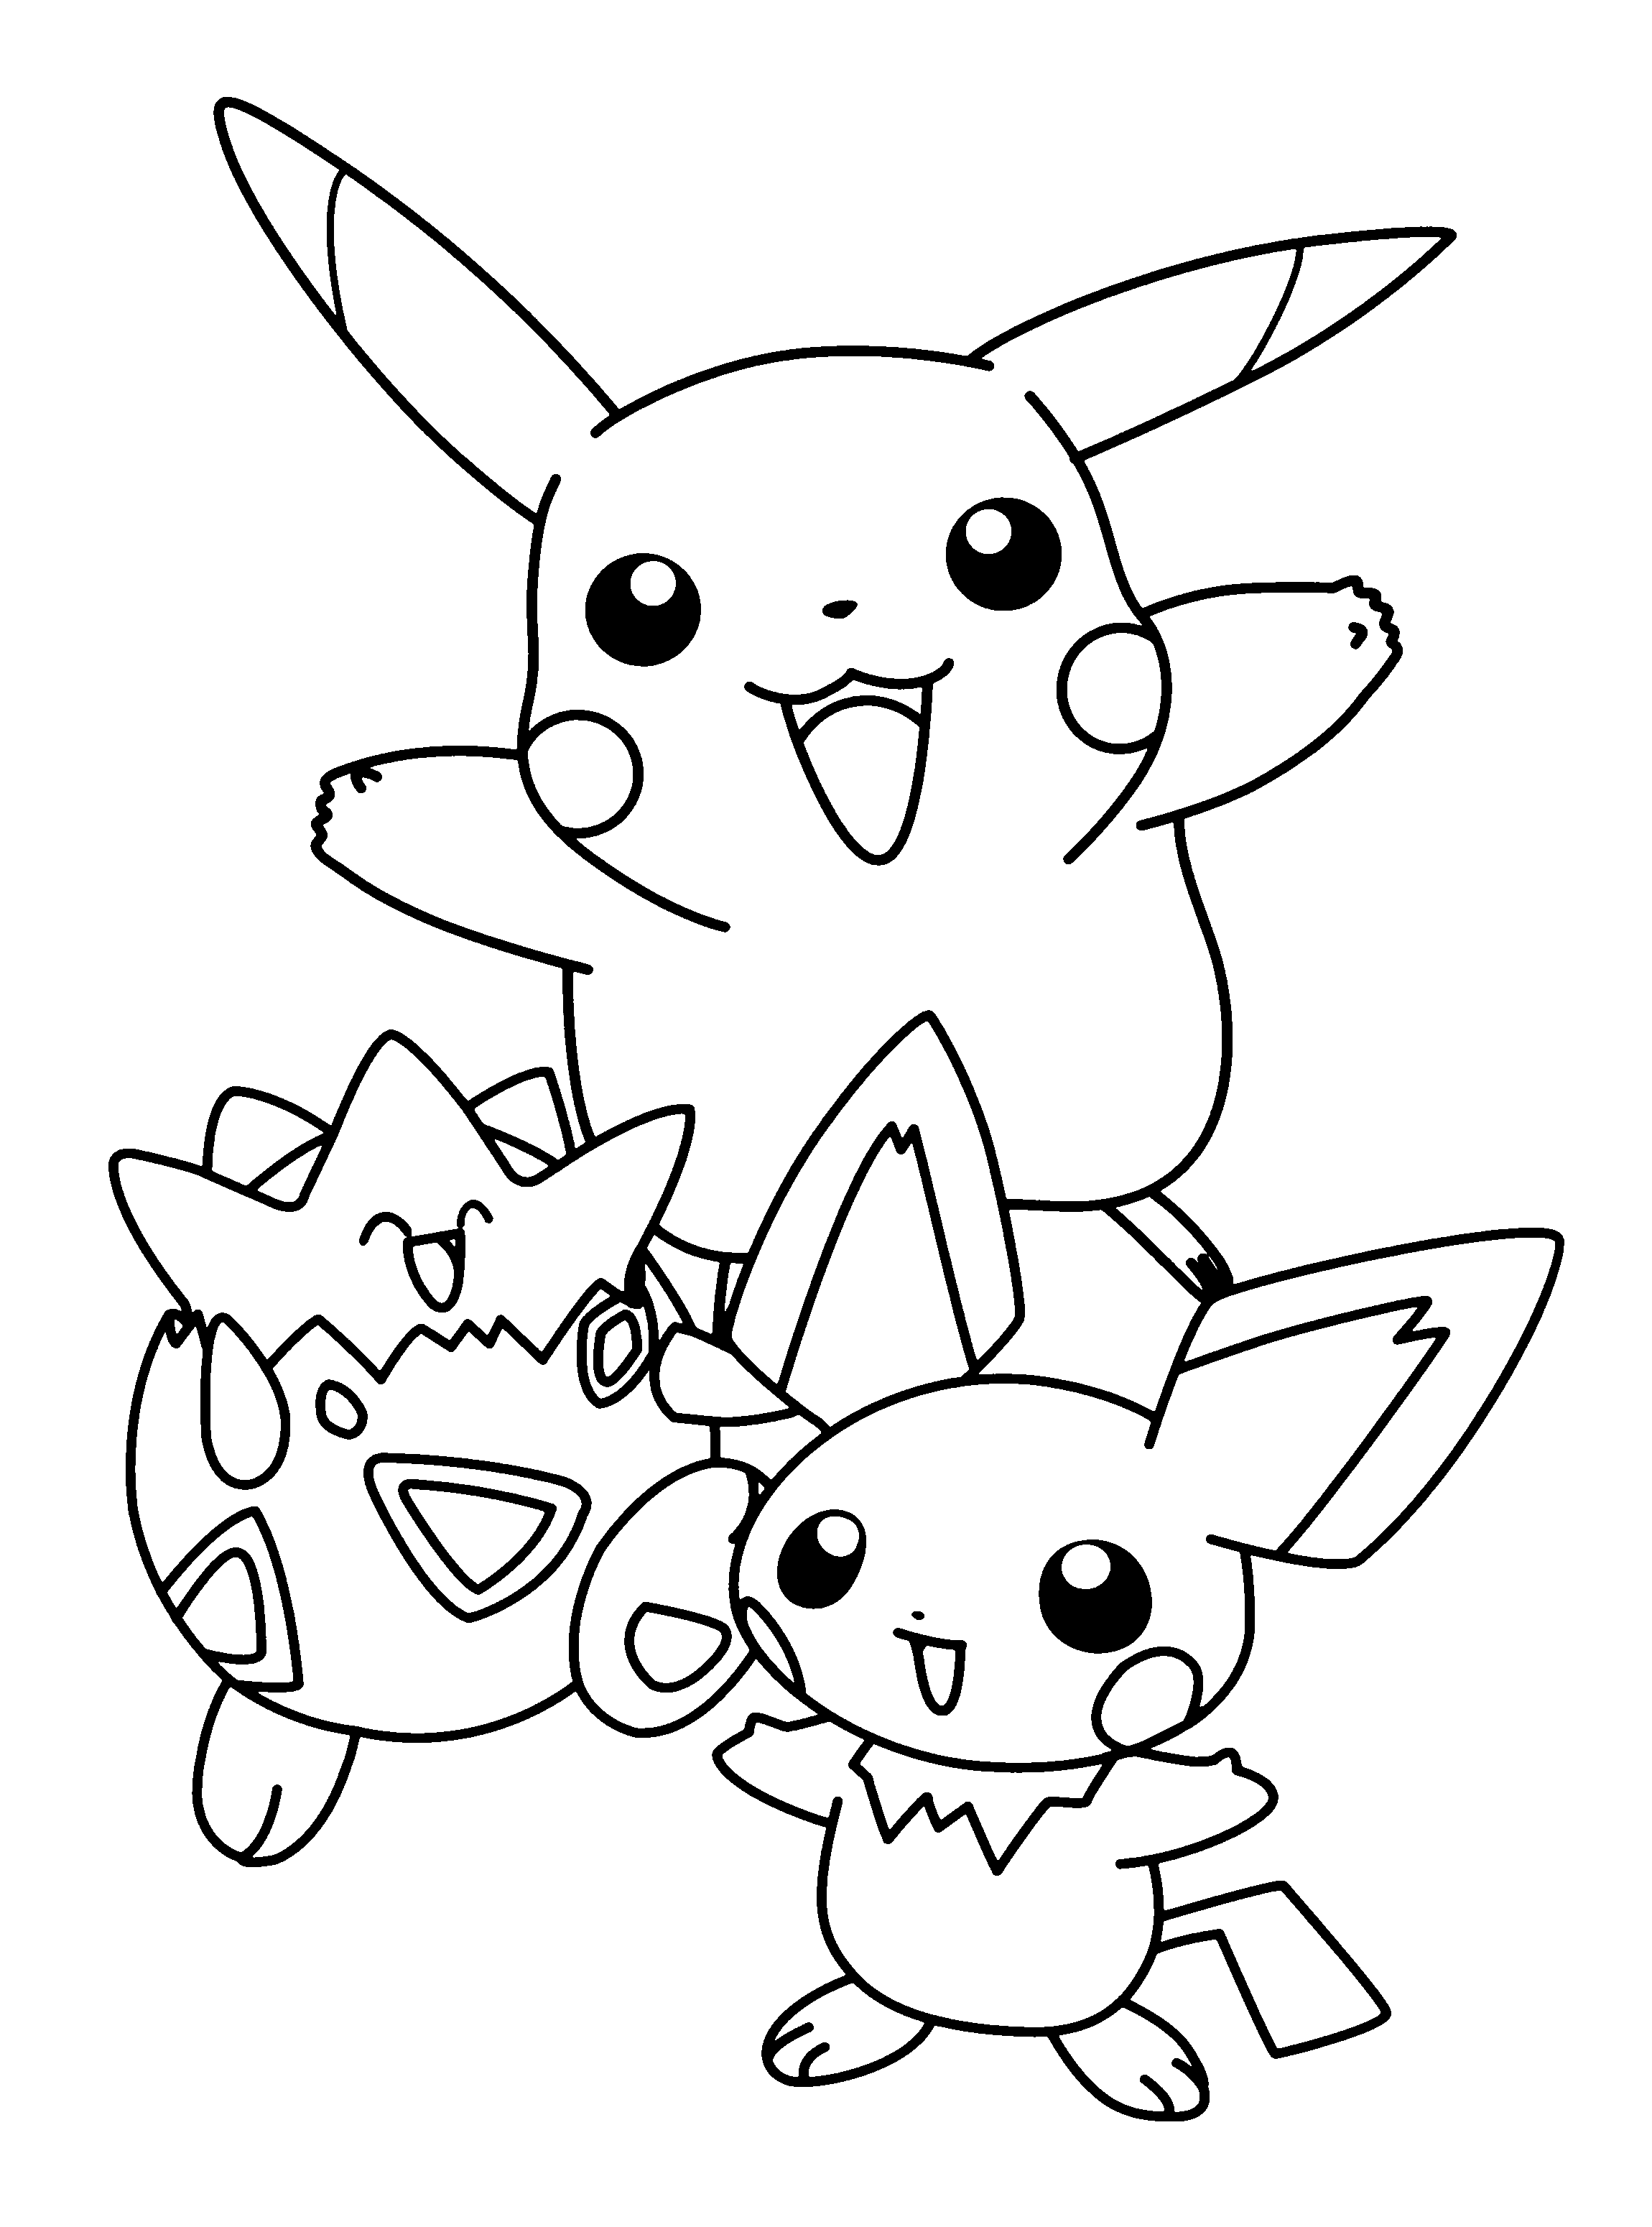 Beautiful Pokemon coloring page to print and color